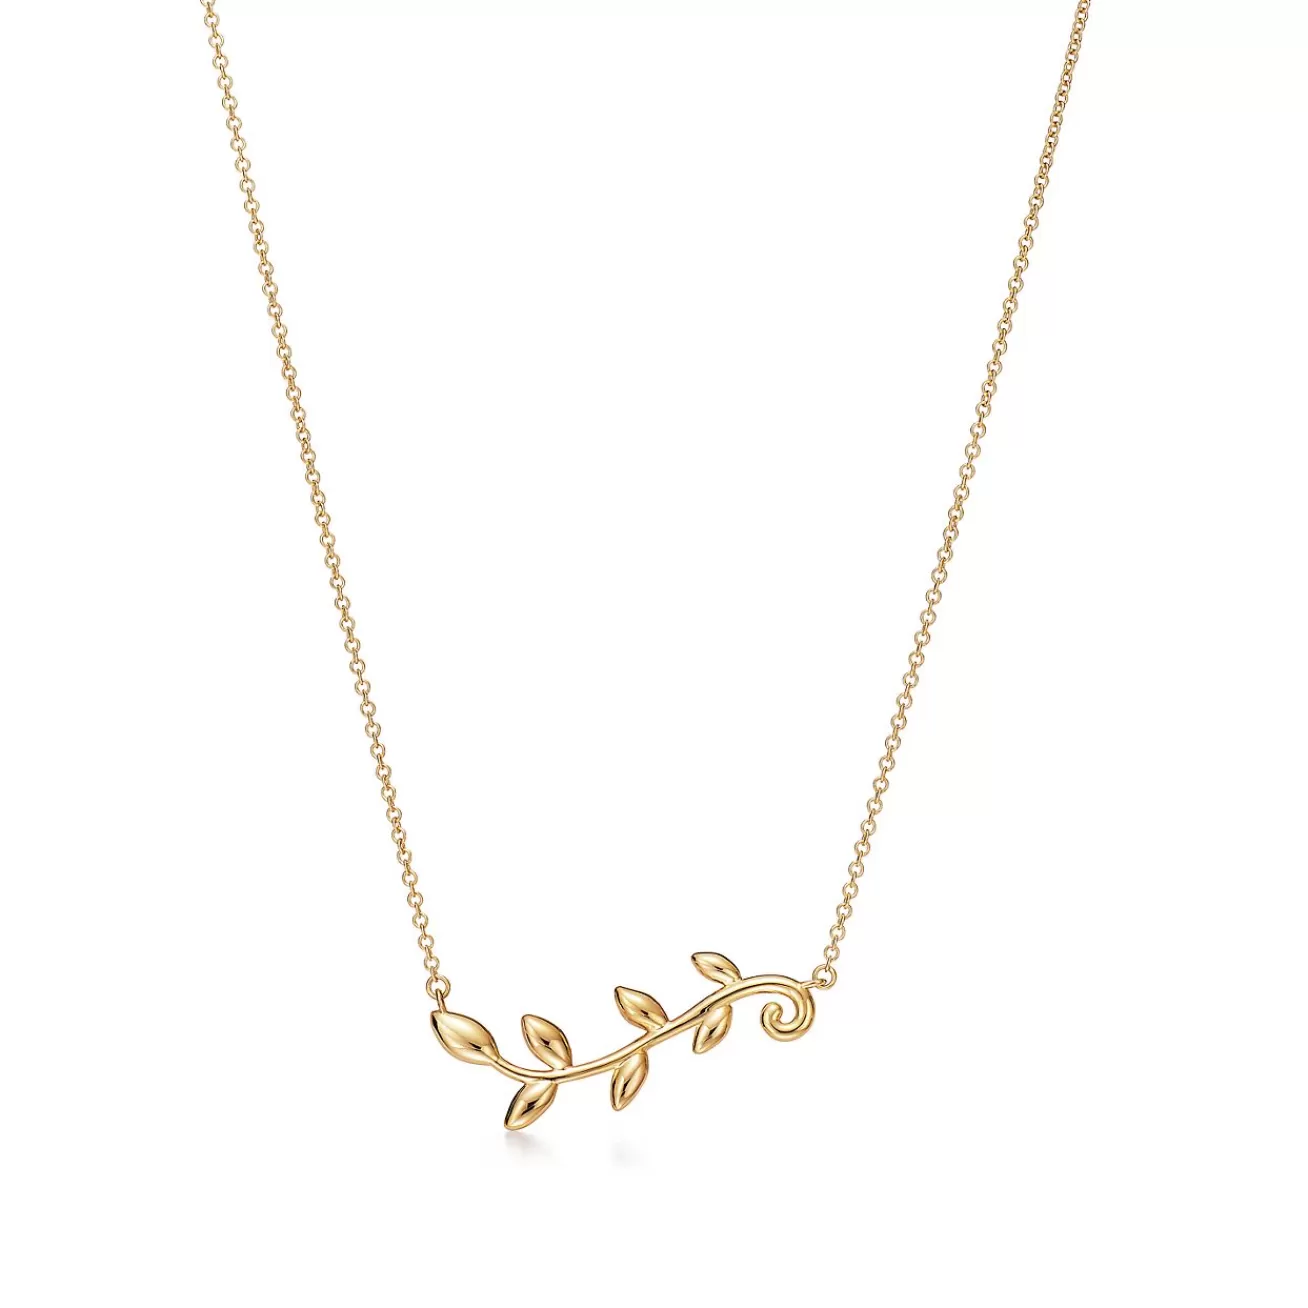 Tiffany & Co. Paloma Picasso® Olive Leaf vine pendant in 18k gold. | ^ Necklaces & Pendants | Gifts for Her